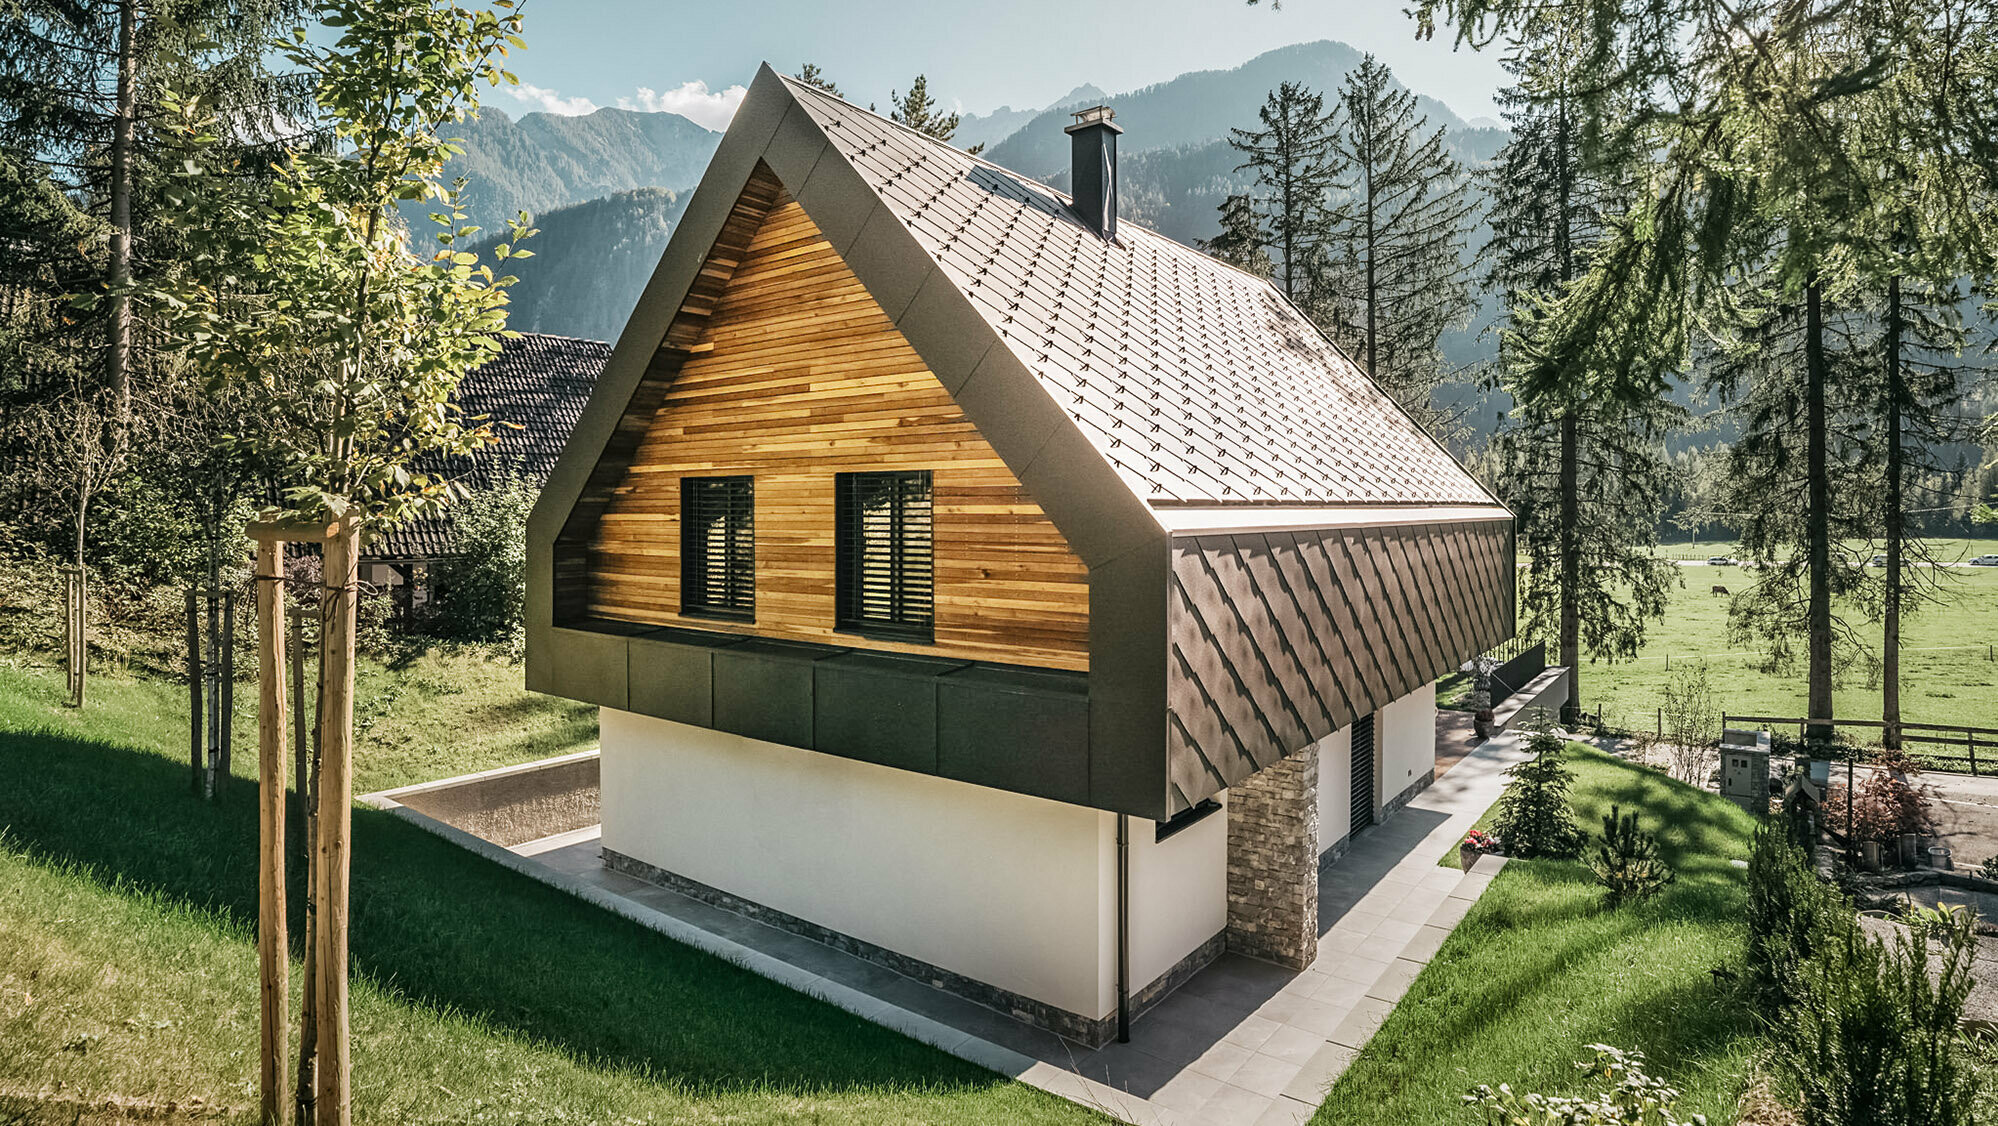 A modern chalet in Slovenia with a combination of traditional and contemporary architectural elements, embedded in an alpine landscape. The house features a wooden façade with closed shutters, a characteristic steep pitched roof with nut-brown roof and wall rhombuses and a chimney. The property is surrounded by abundant green spaces, trees and offers a clear view of the distant mountains and an open valley